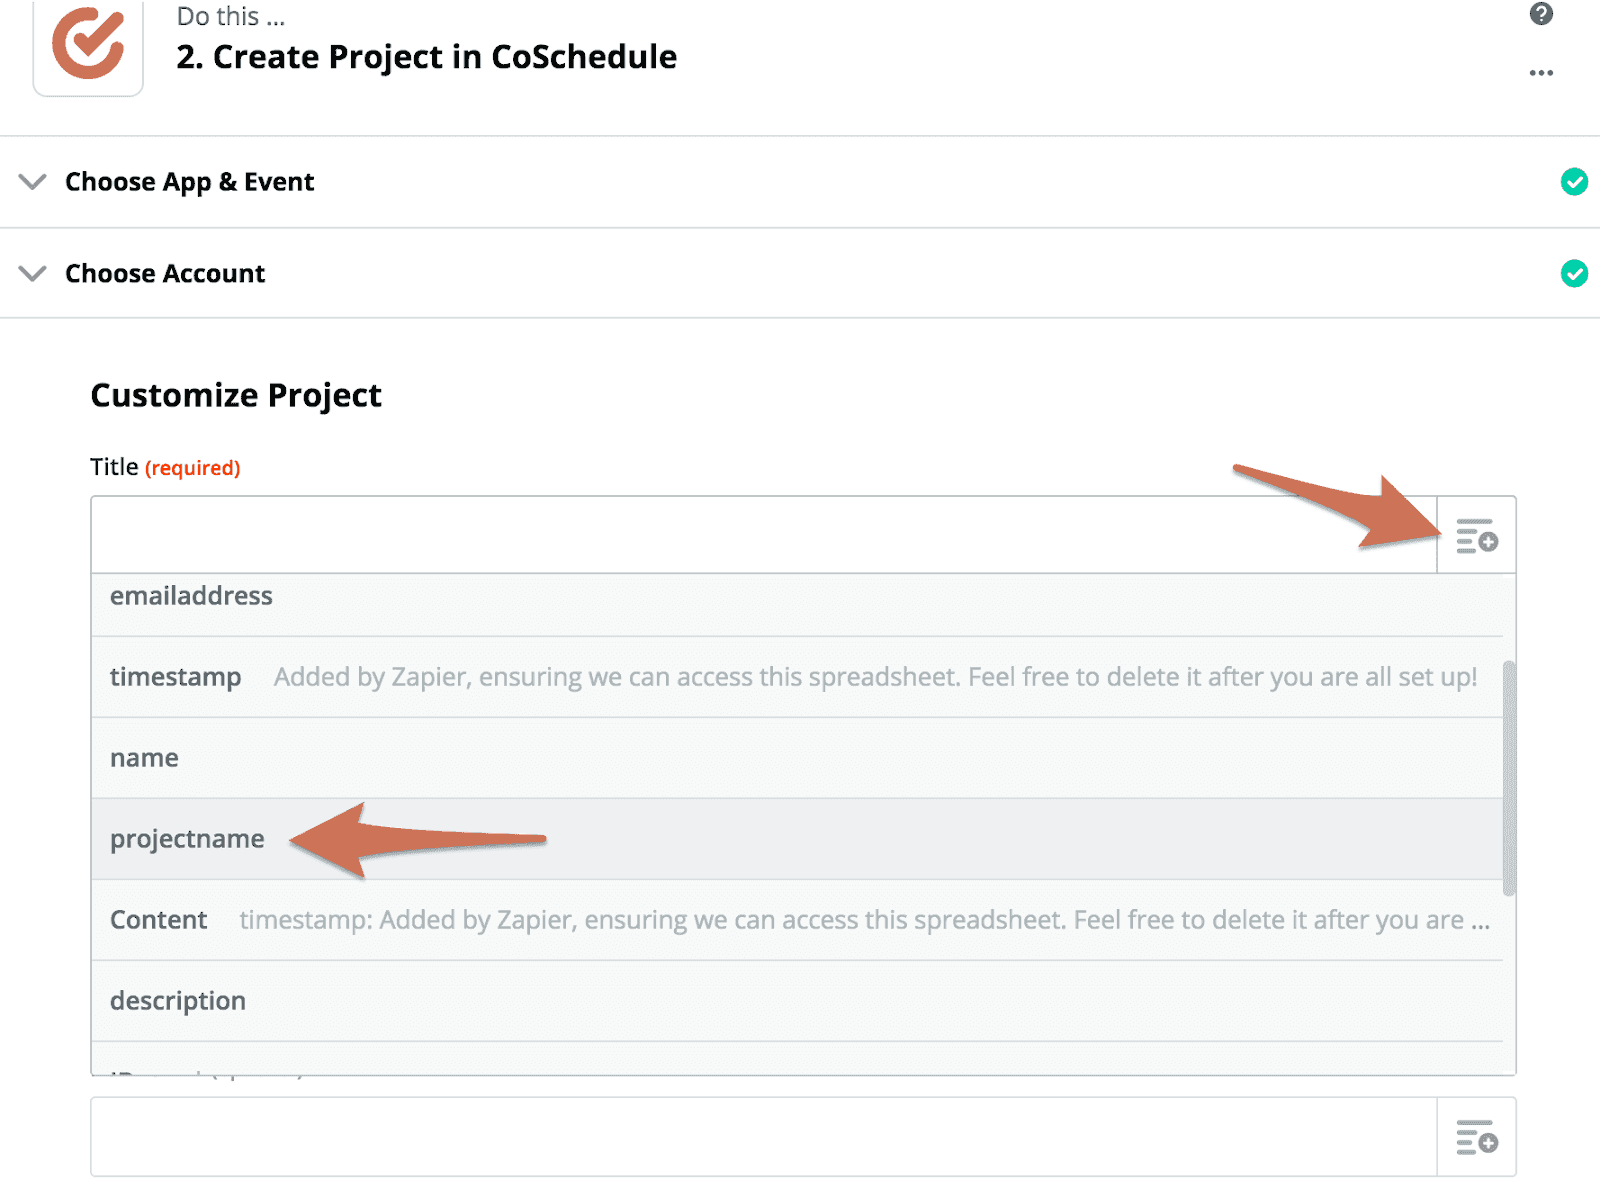 Click the project name option.